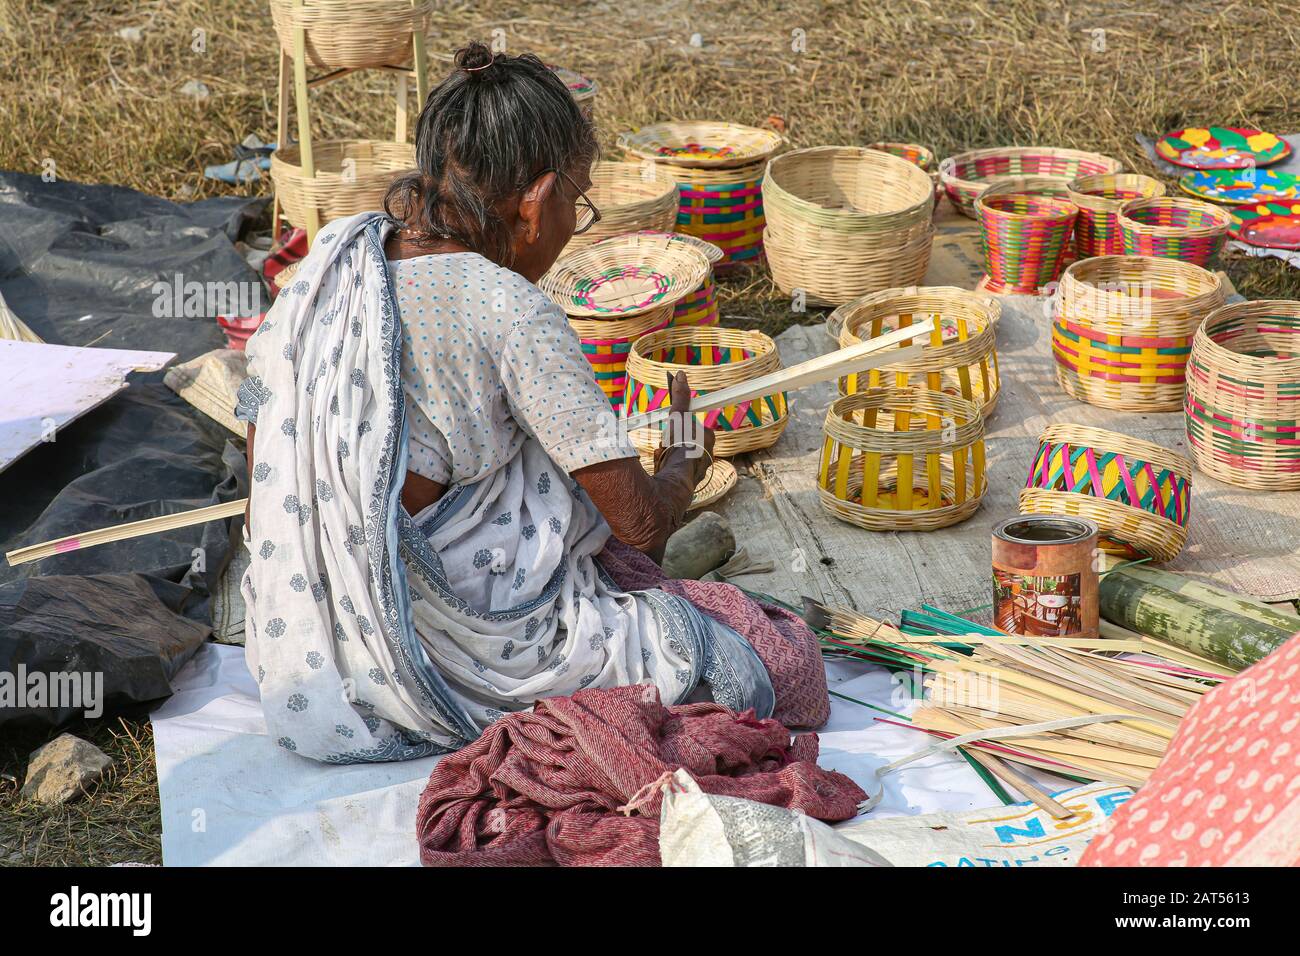 Old woman slicing bamboo cane strands for making baskets to sell for a living at a village in Bolpur, West Bengal, India Stock Photo